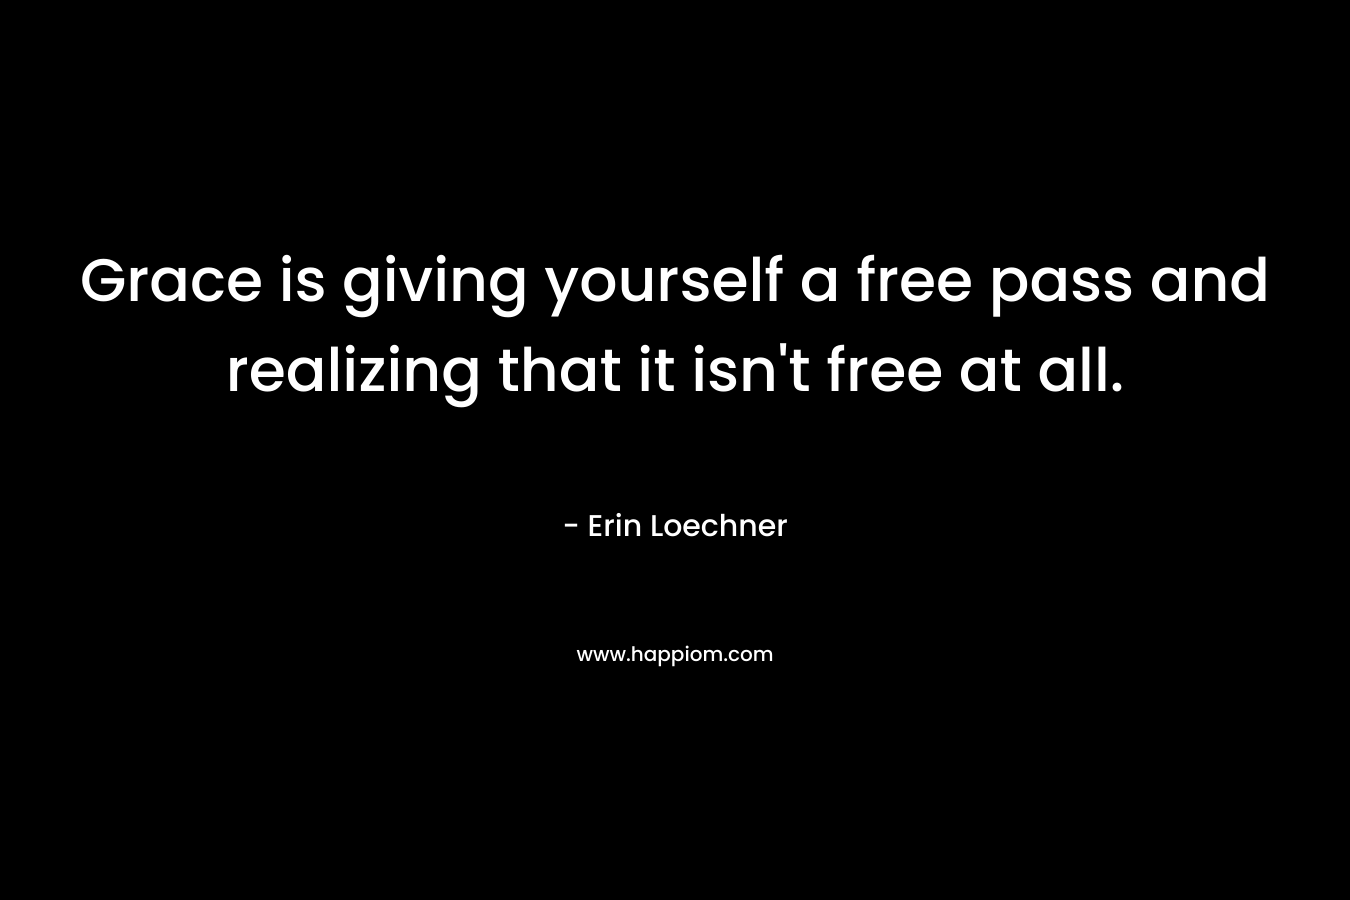 Grace is giving yourself a free pass and realizing that it isn’t free at all. – Erin Loechner